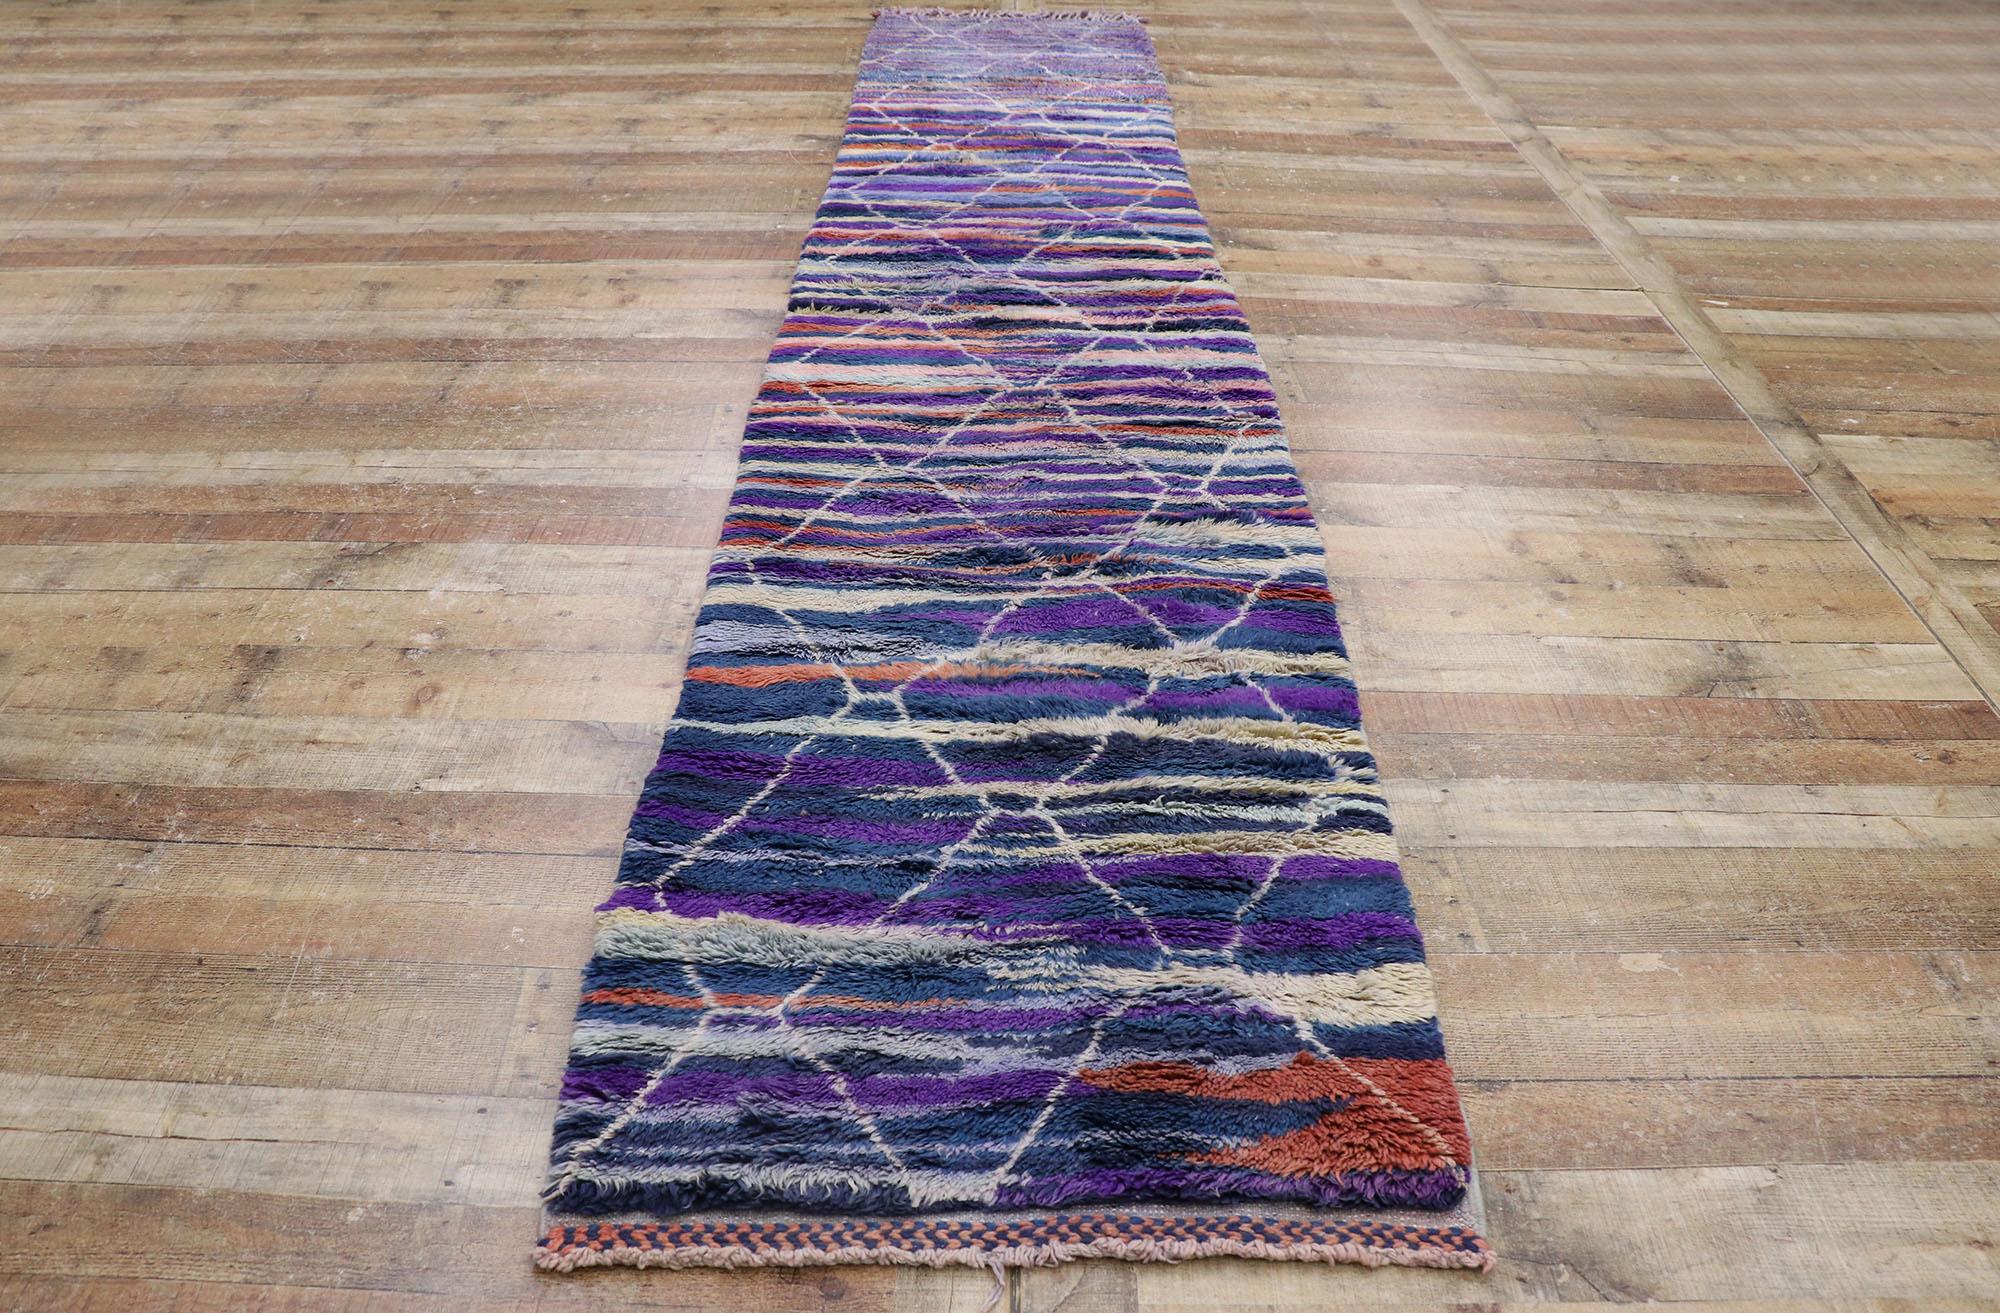 New Contemporary Berber Moroccan Runner Inspired by Sol LeWitt For Sale 1